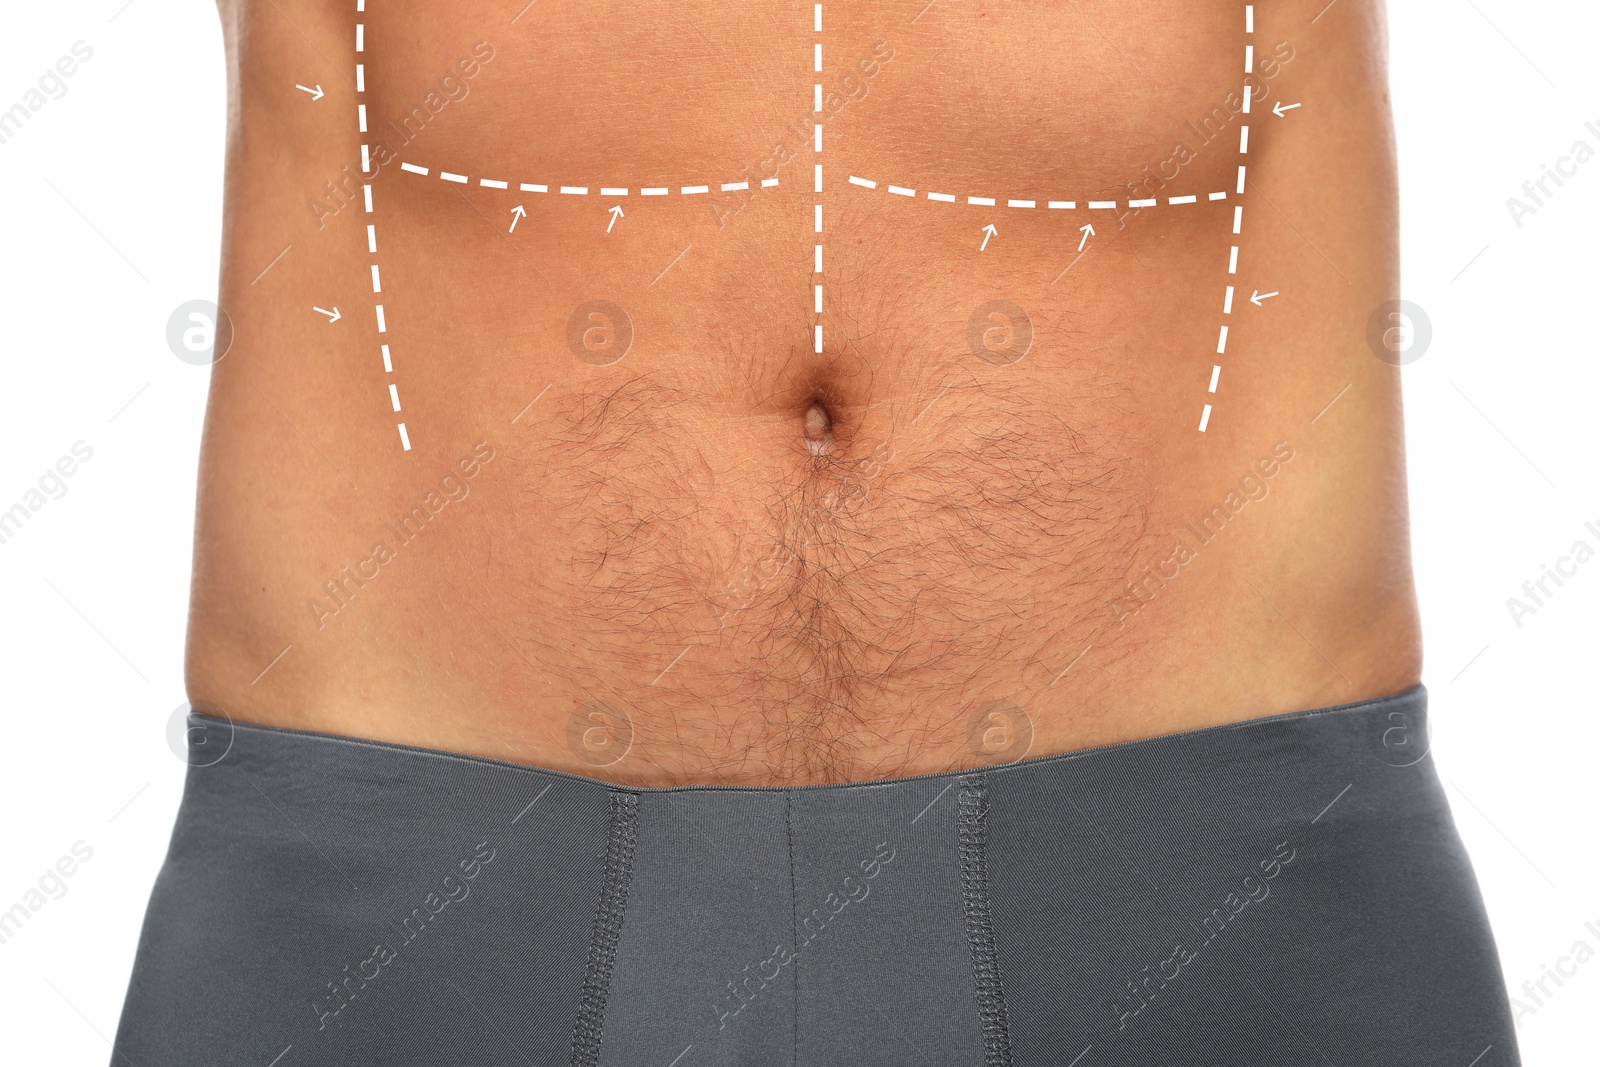 Image of Man with markings for cosmetic surgery on his abdomen against white background, closeup